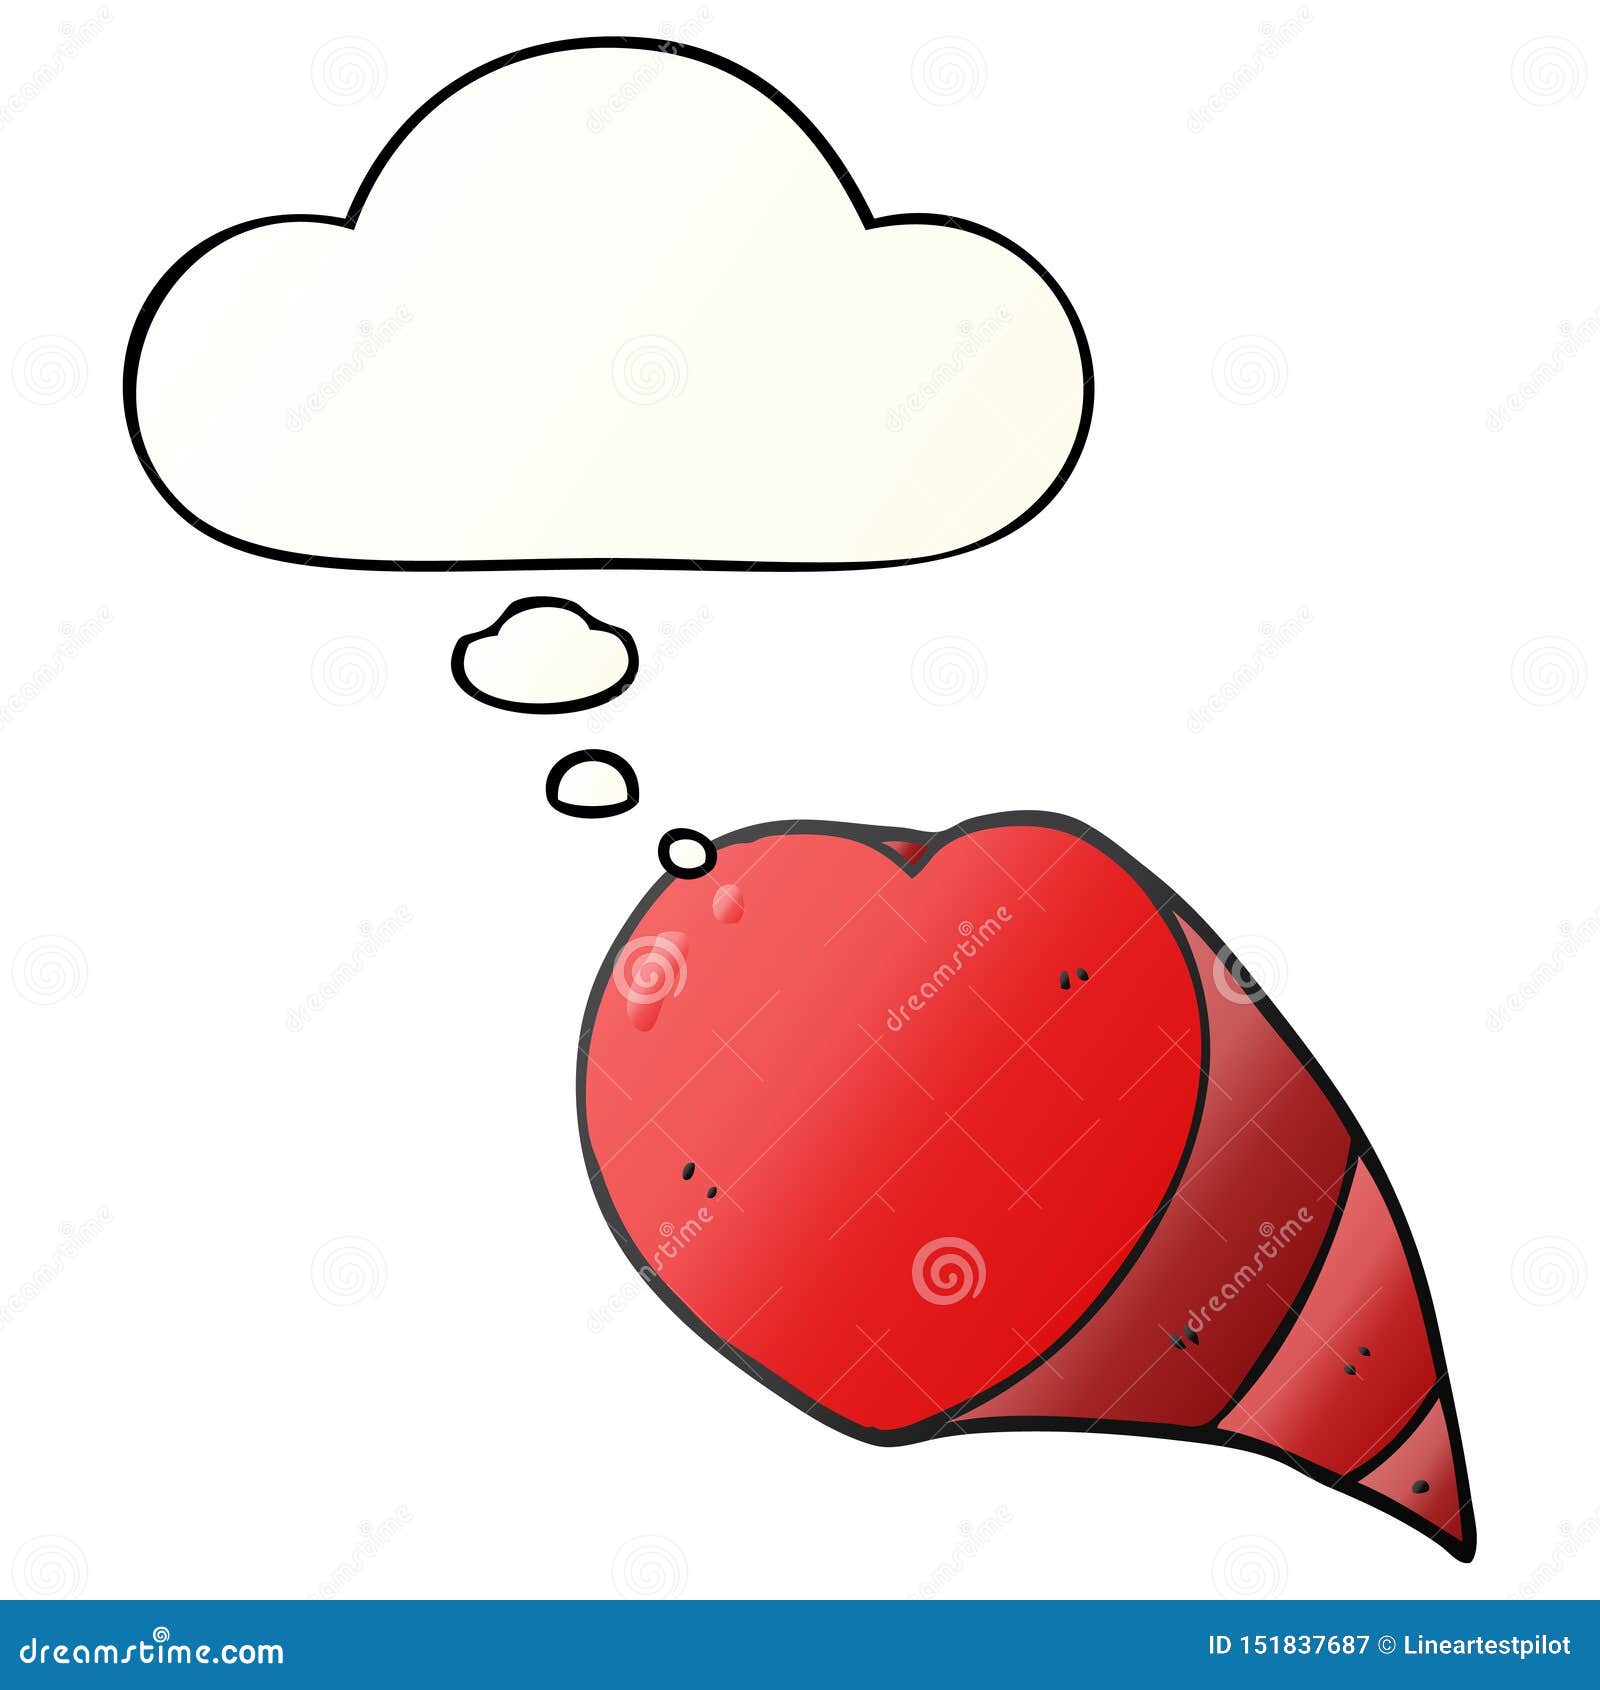 A Creative Cartoon Love Heart Symbol And Thought Bubble In